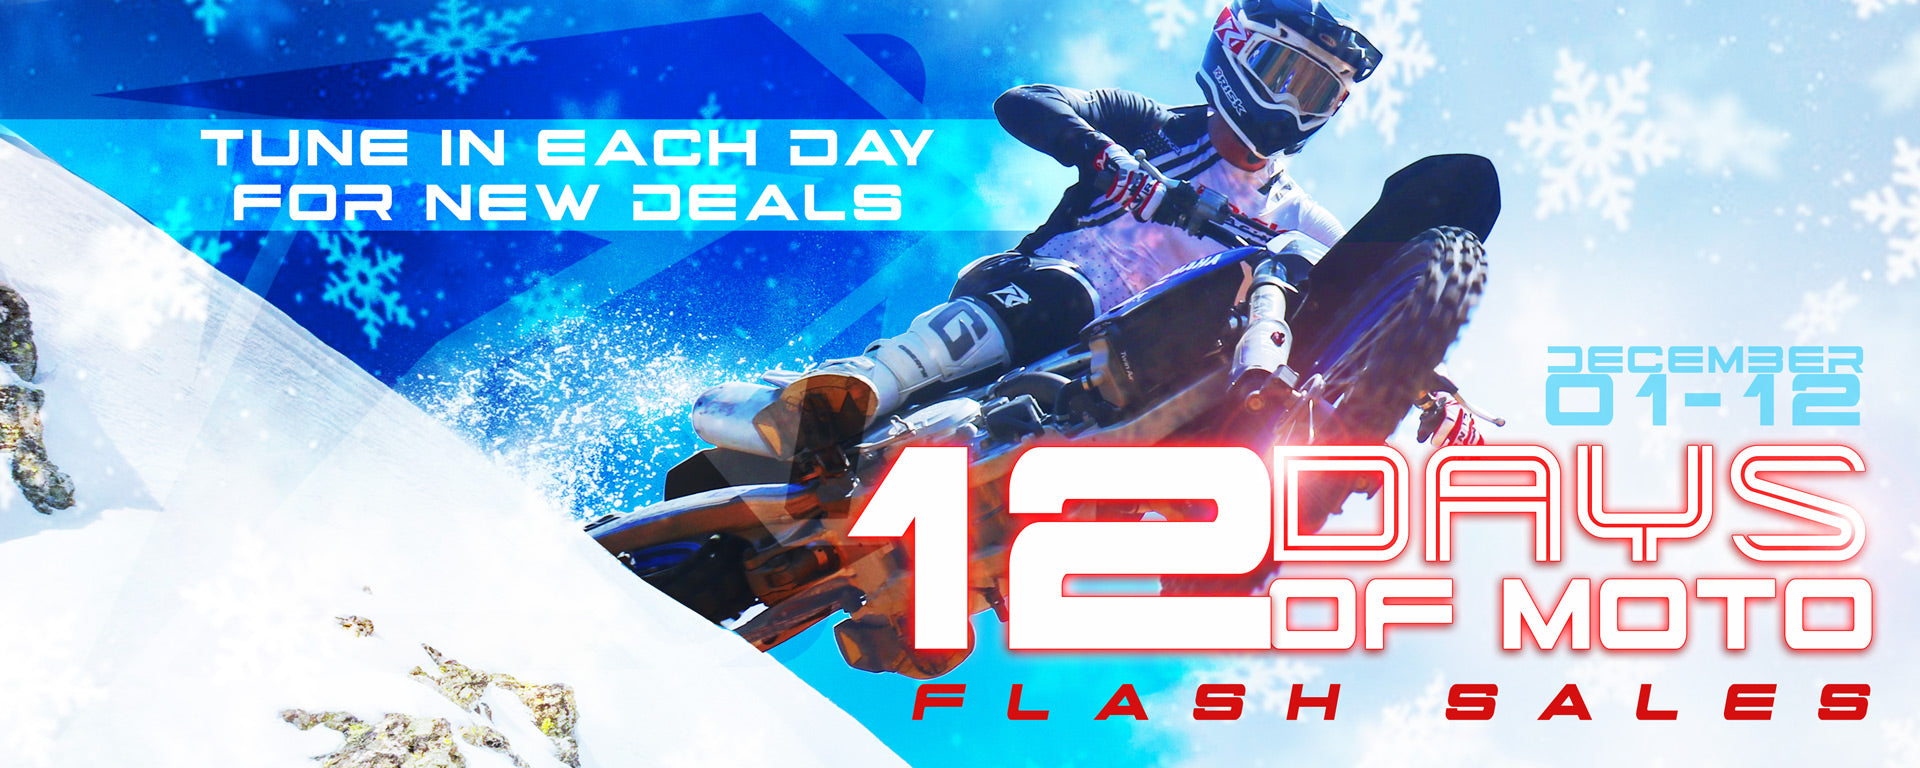 12 days of moto flash sales banner. tune in each day for new deals. December 01-12. Motocross racer jumping over in the background